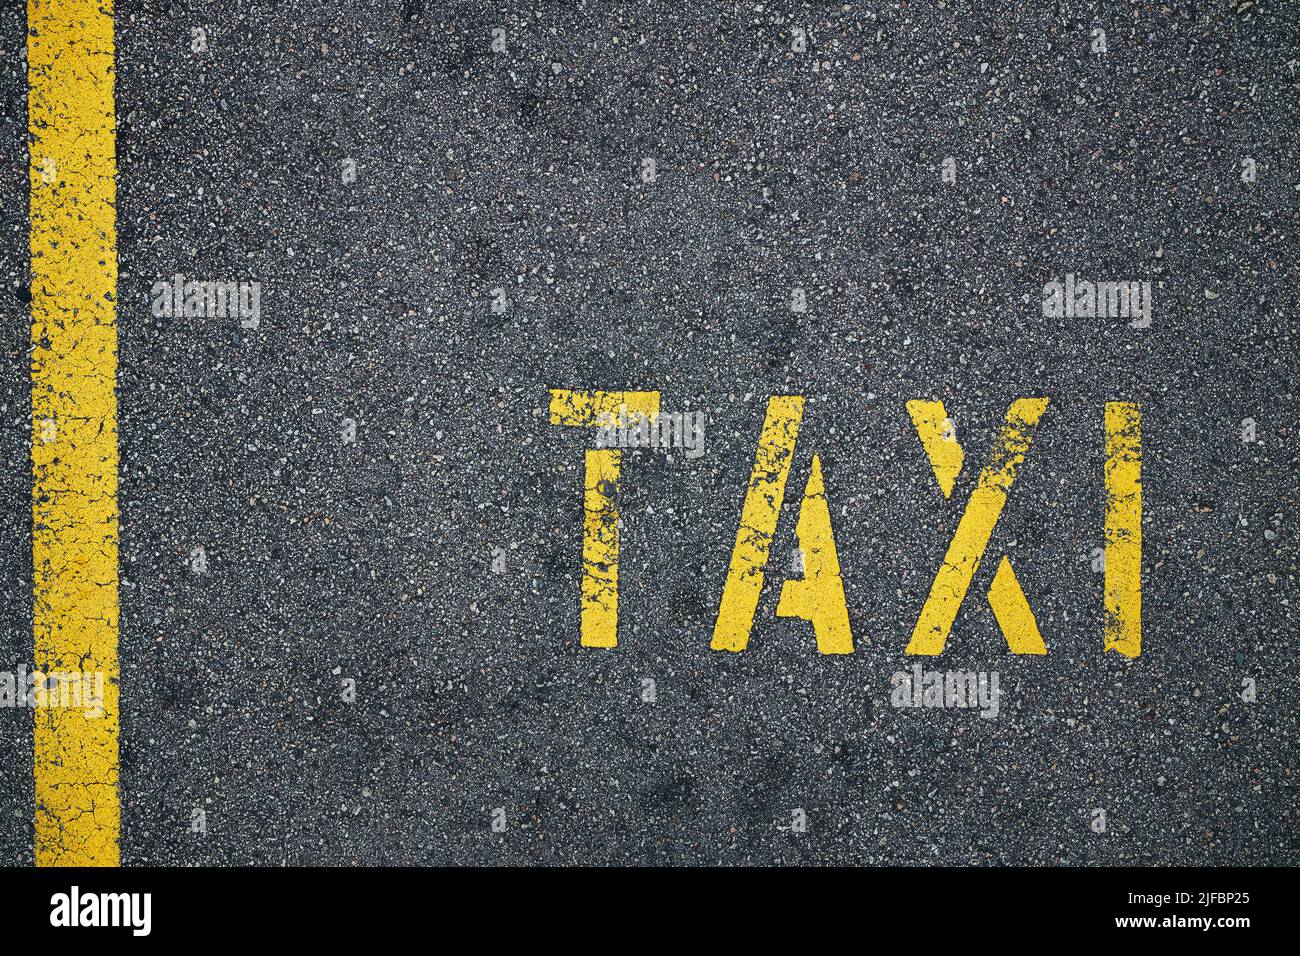 Yellow line and taxi sign on rough asphalt road in city. Stock Photo